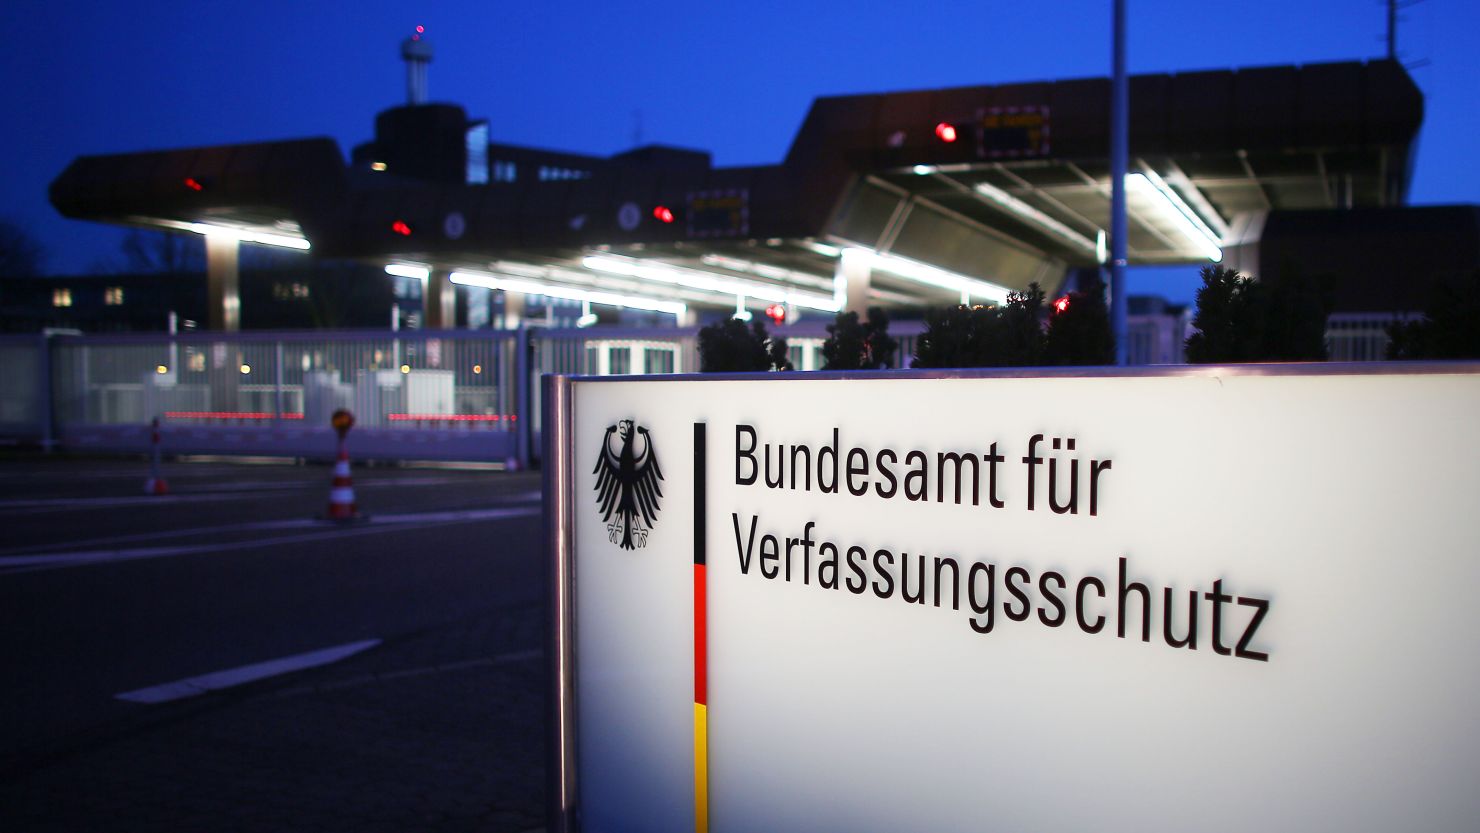 A man working at the German Federal Office for the Protection of the Constitution has been arrested.